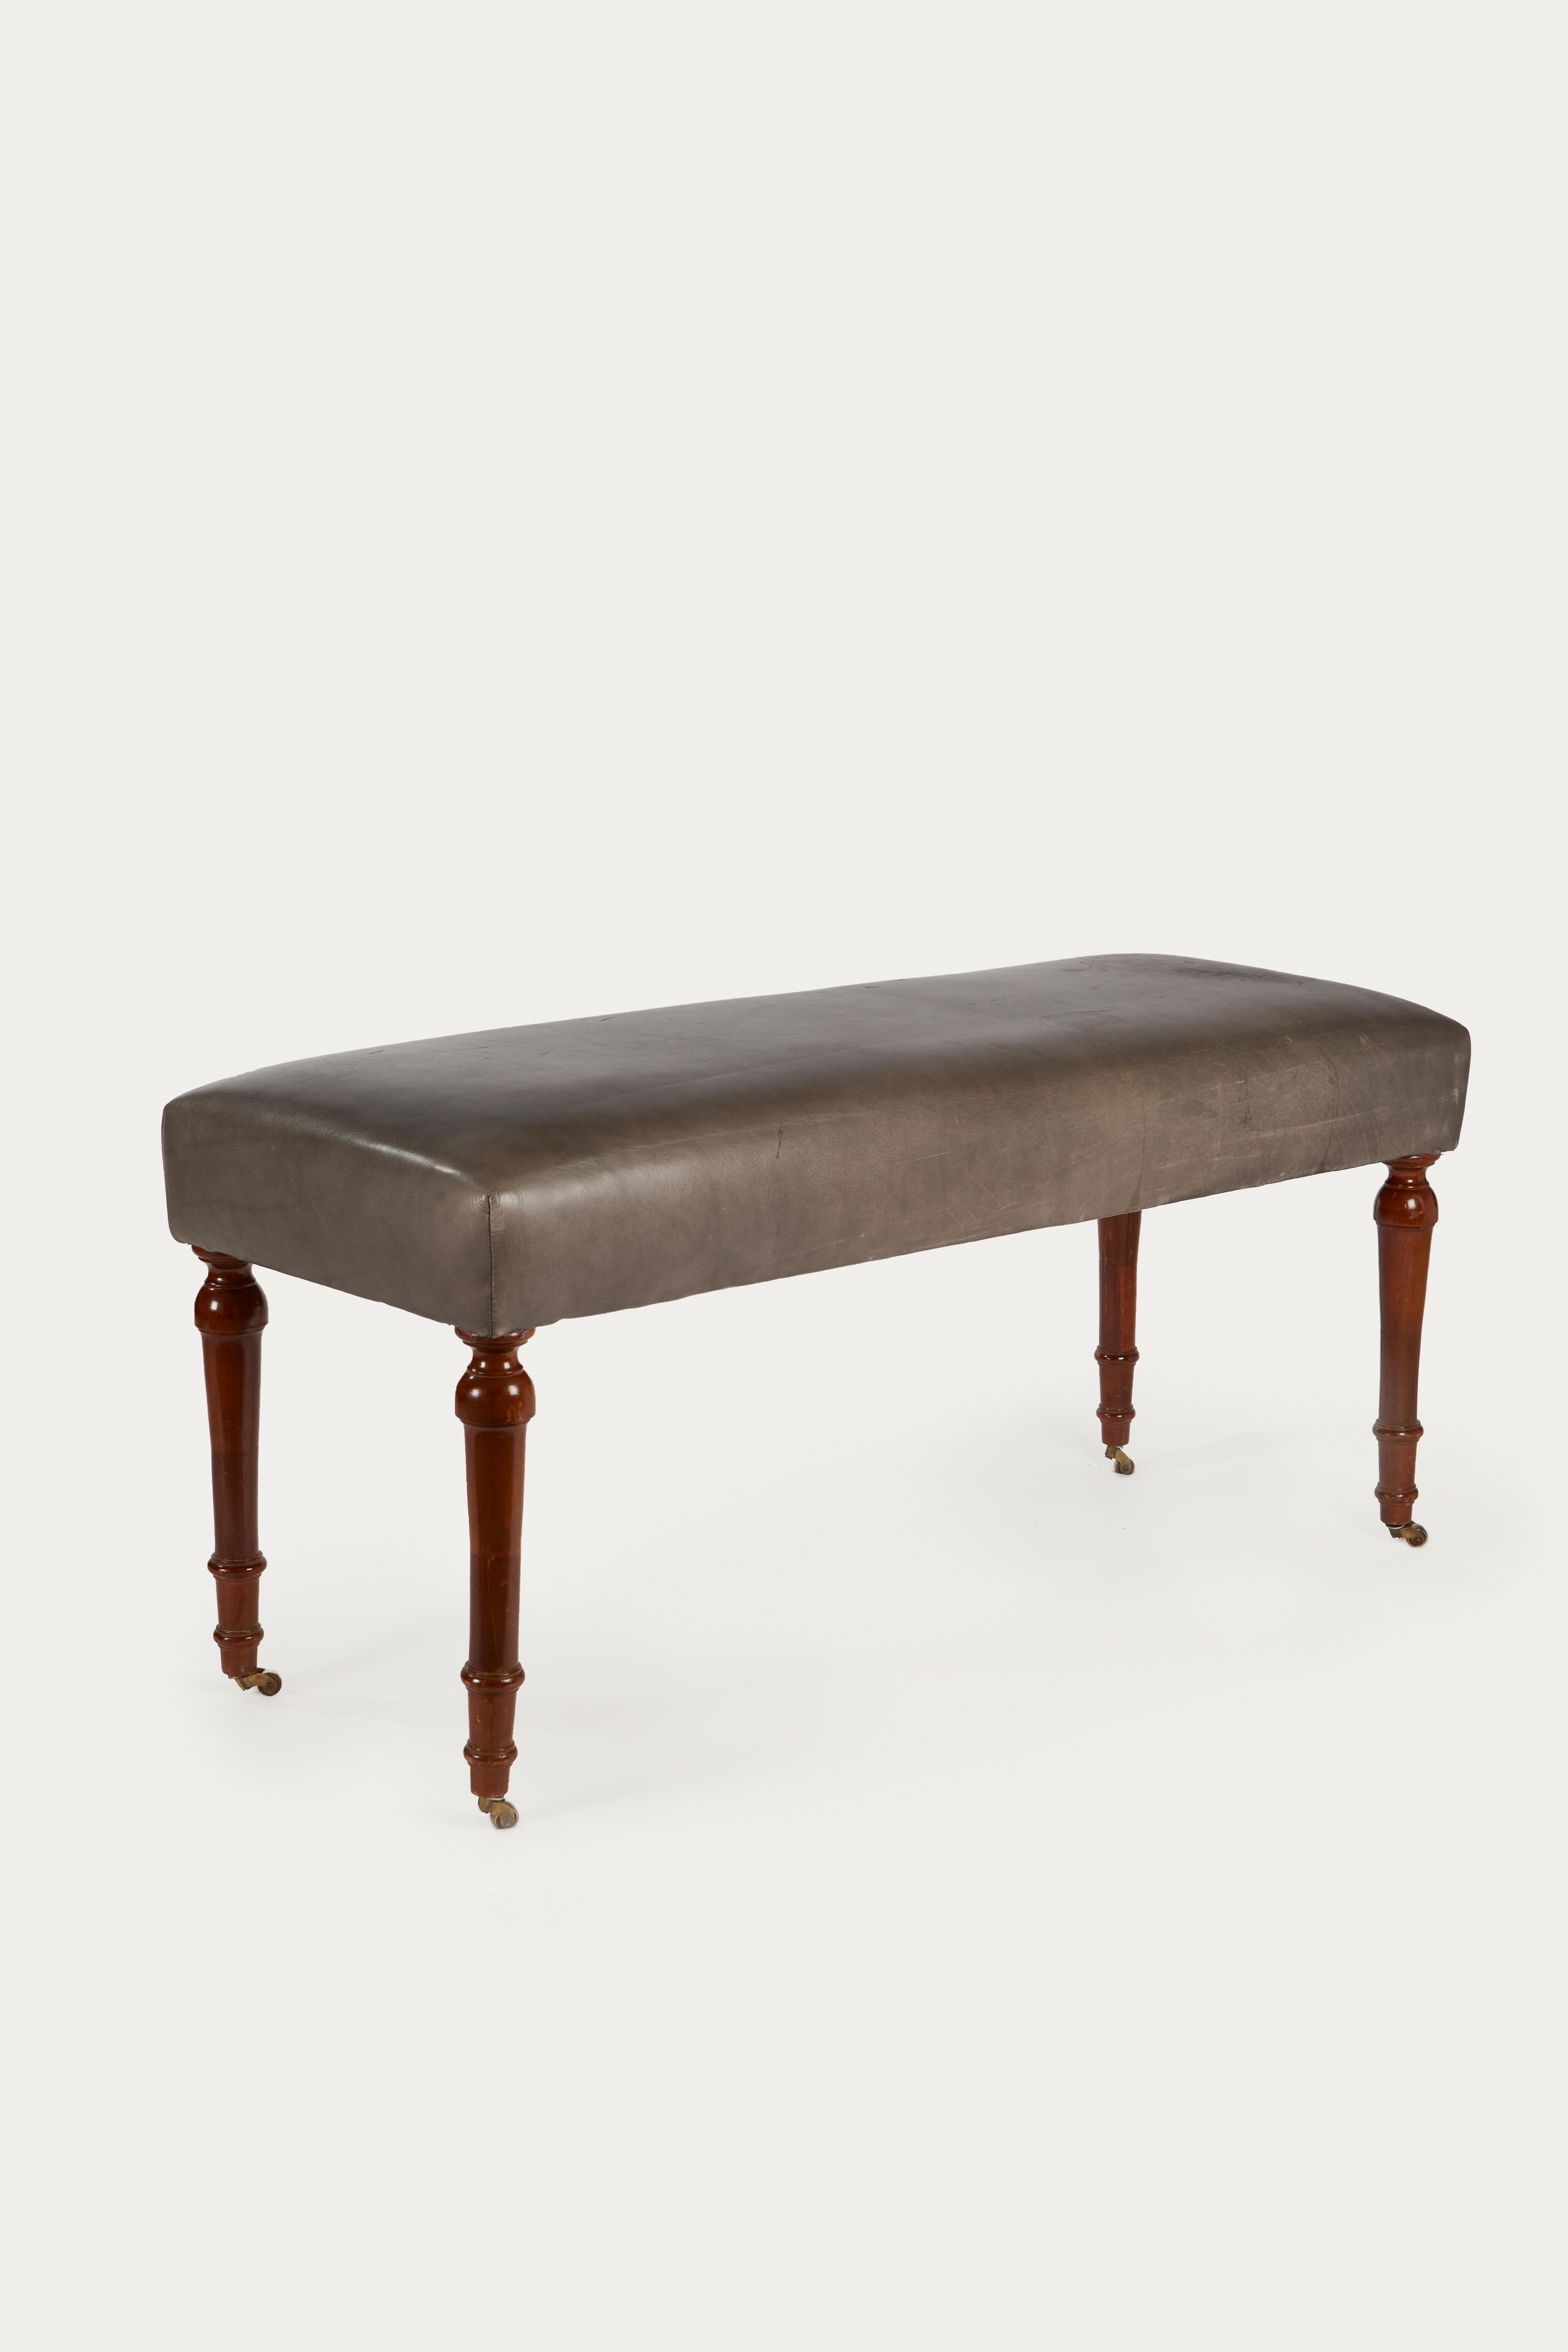 20th Century French Louis XVI Style Bench with Mahogany Legs and Brass Casters For Sale